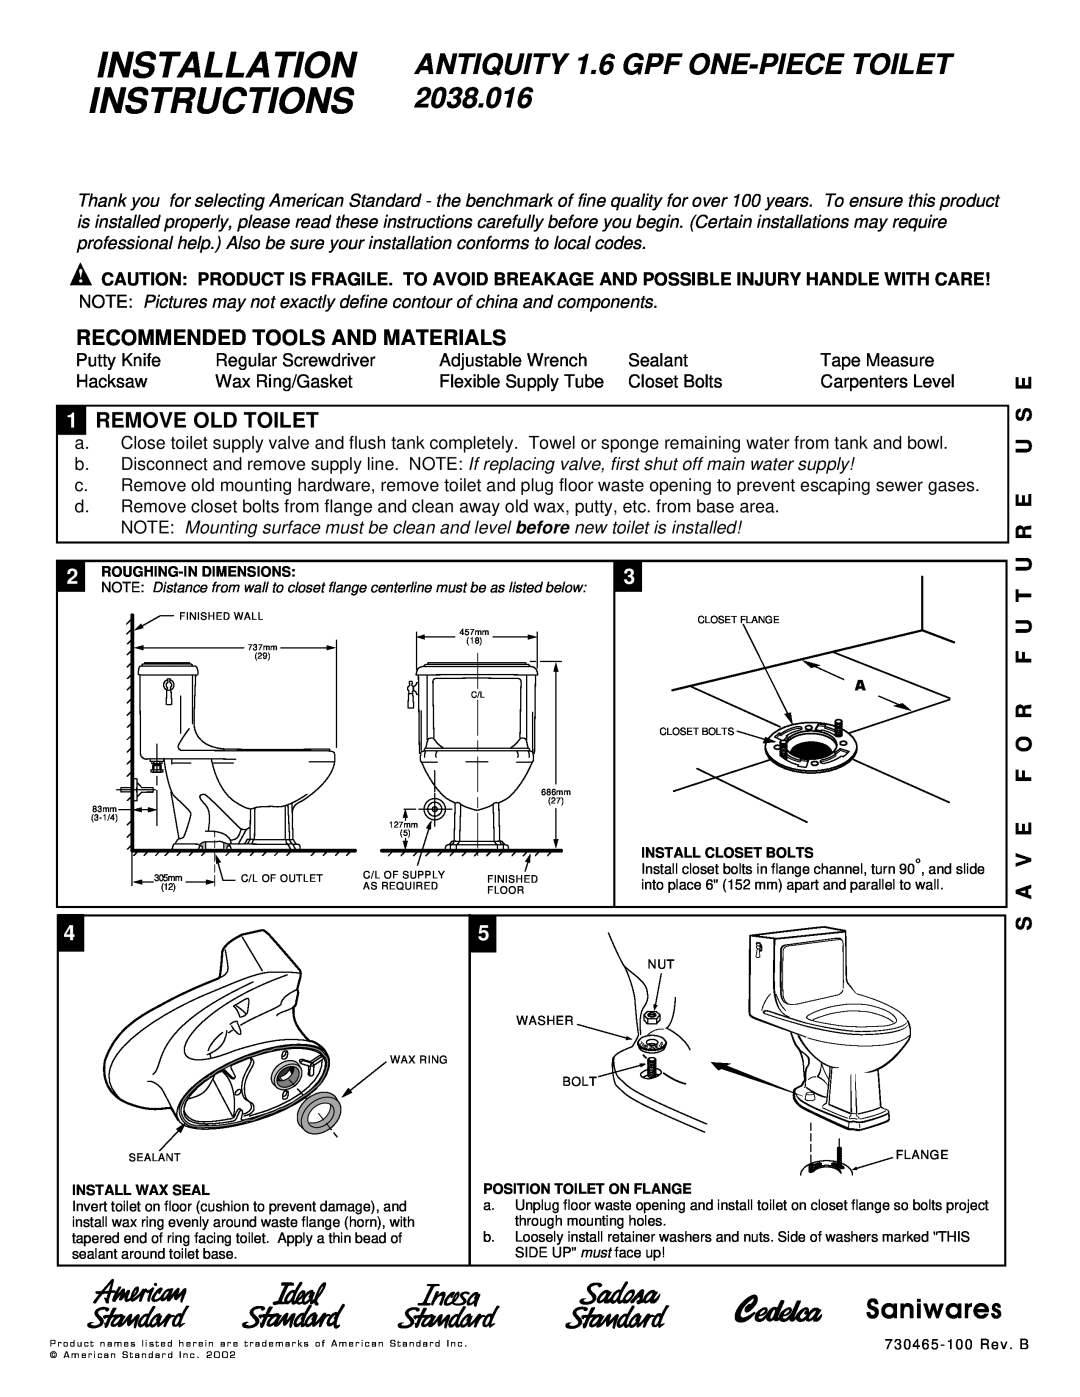 American Standard 2038.016 installation instructions Recommended Tools And Materials, 1REMOVE OLD TOILET, U R E U S E 